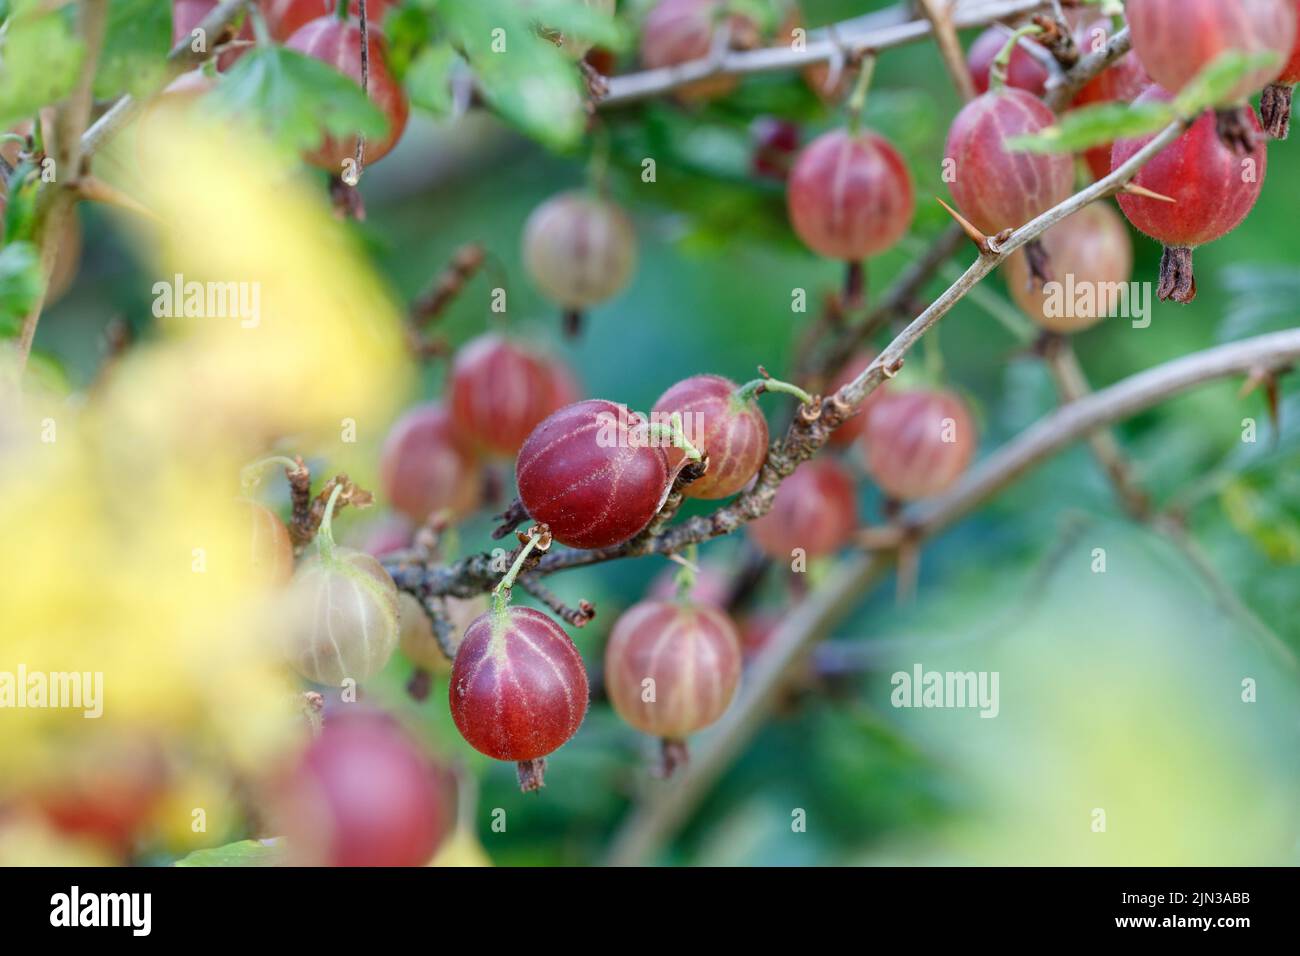 Fresh gooseberry on a branch of a gooseberry Bush in the garden. Close-up view of organic gooseberry berries hanging on a branch under the leaves Stock Photo